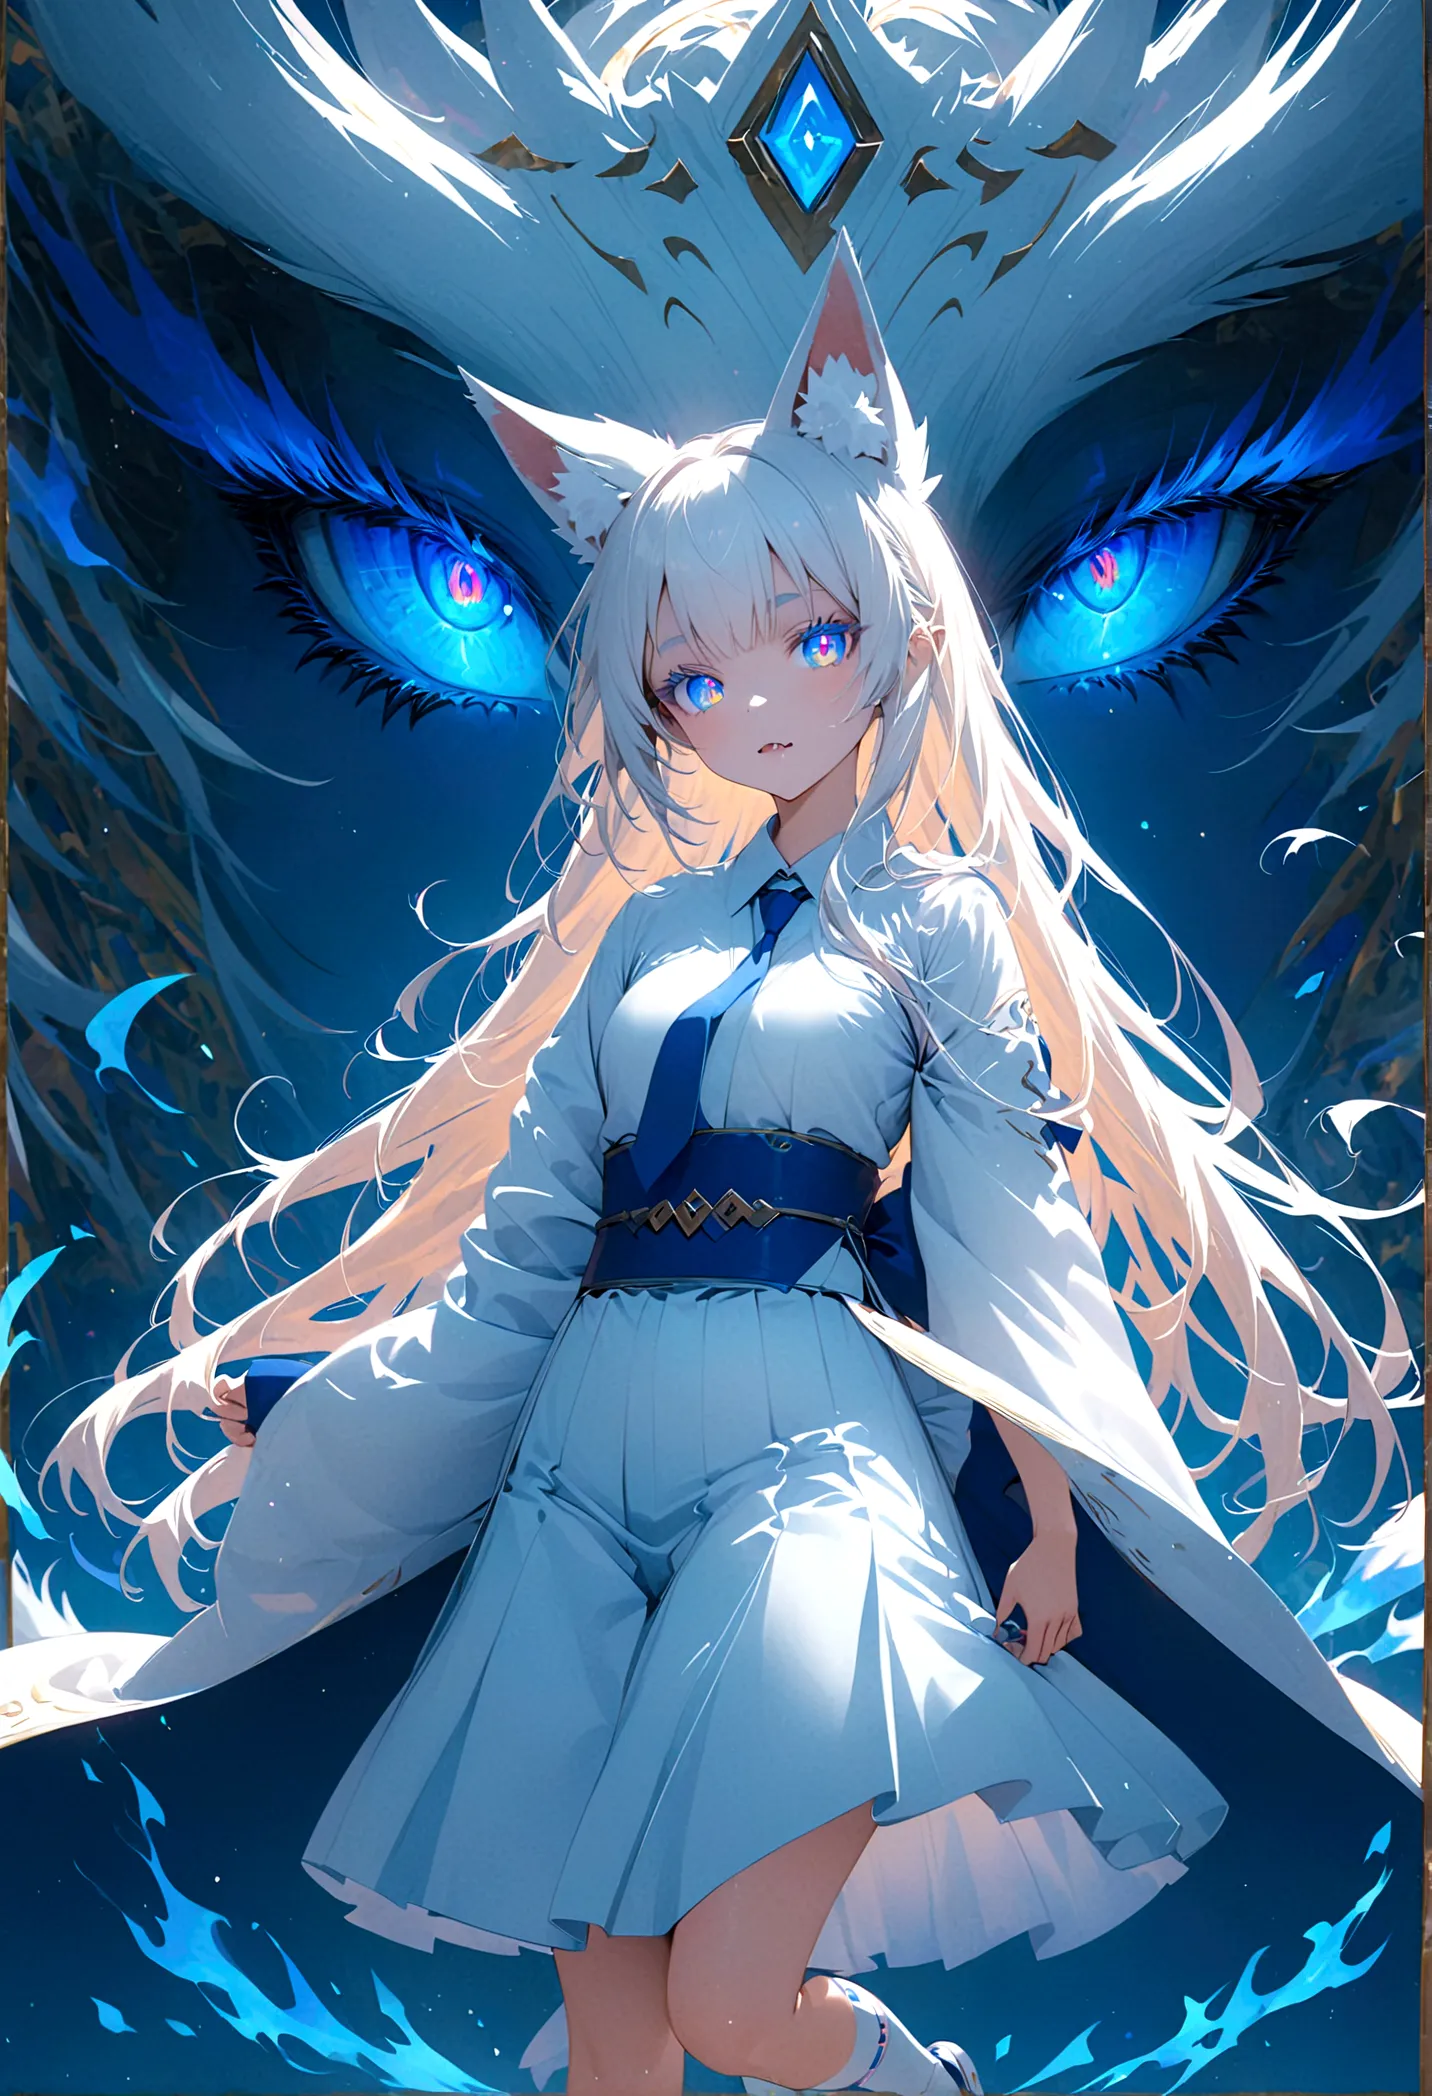 Anime girl with white long hair with white fox ears with rainbow coloured eyes and fox fangs wearing white hakama with blue belt...